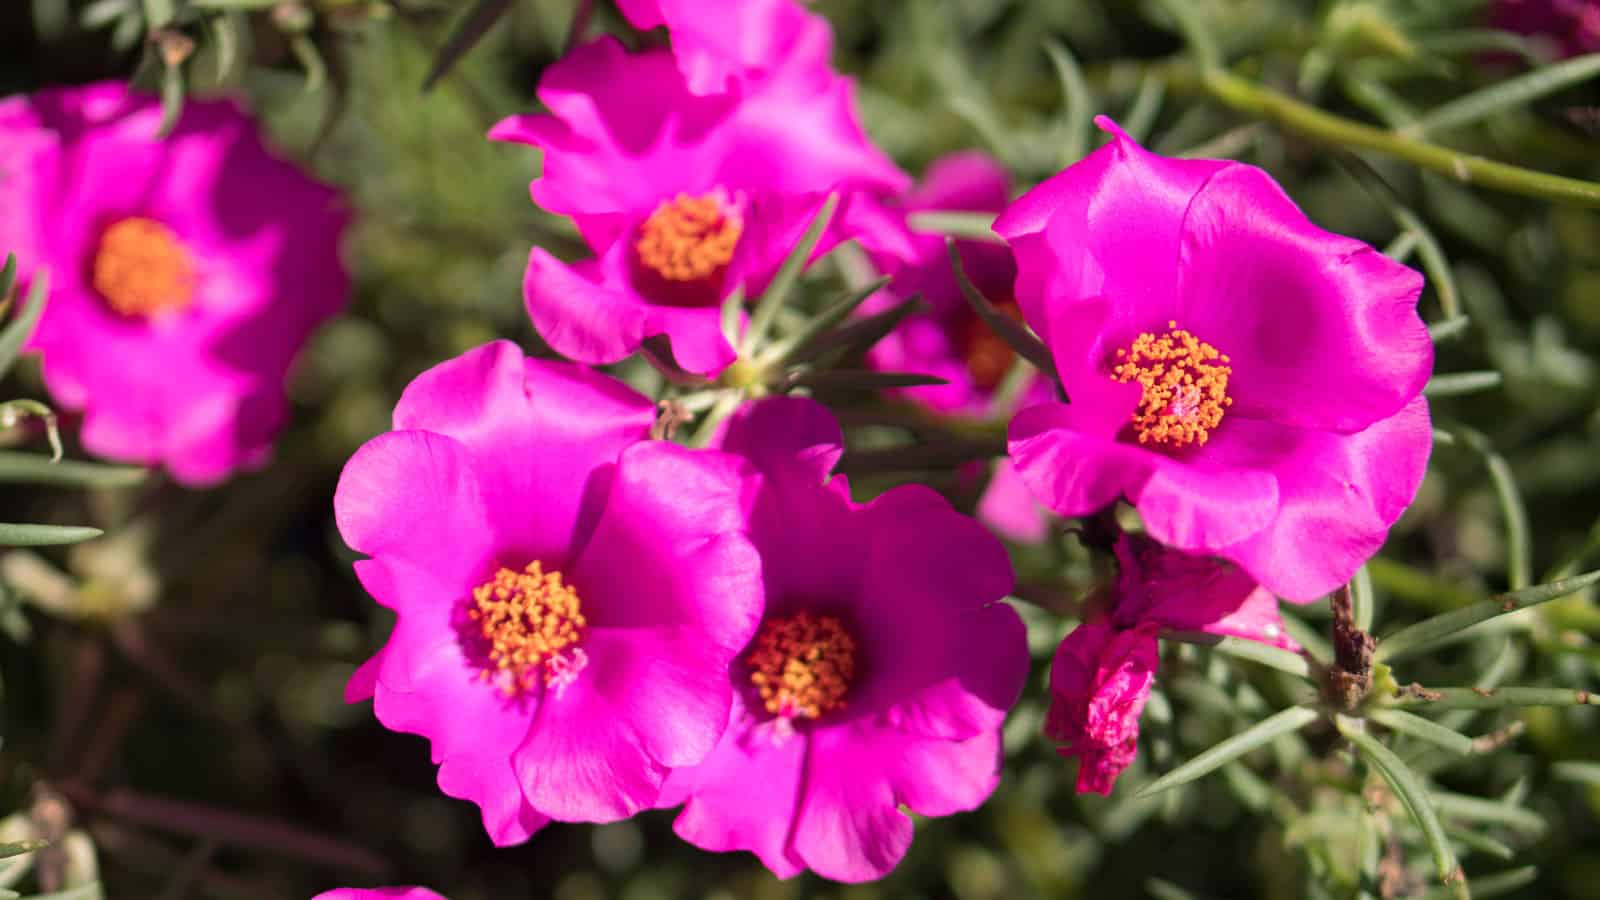 Gorgeous bright pink Portulaca grandiflora or Moss rose , 15 Vivid Pink Succulent Flowers That Are an Unexpected Delight - 1600x900